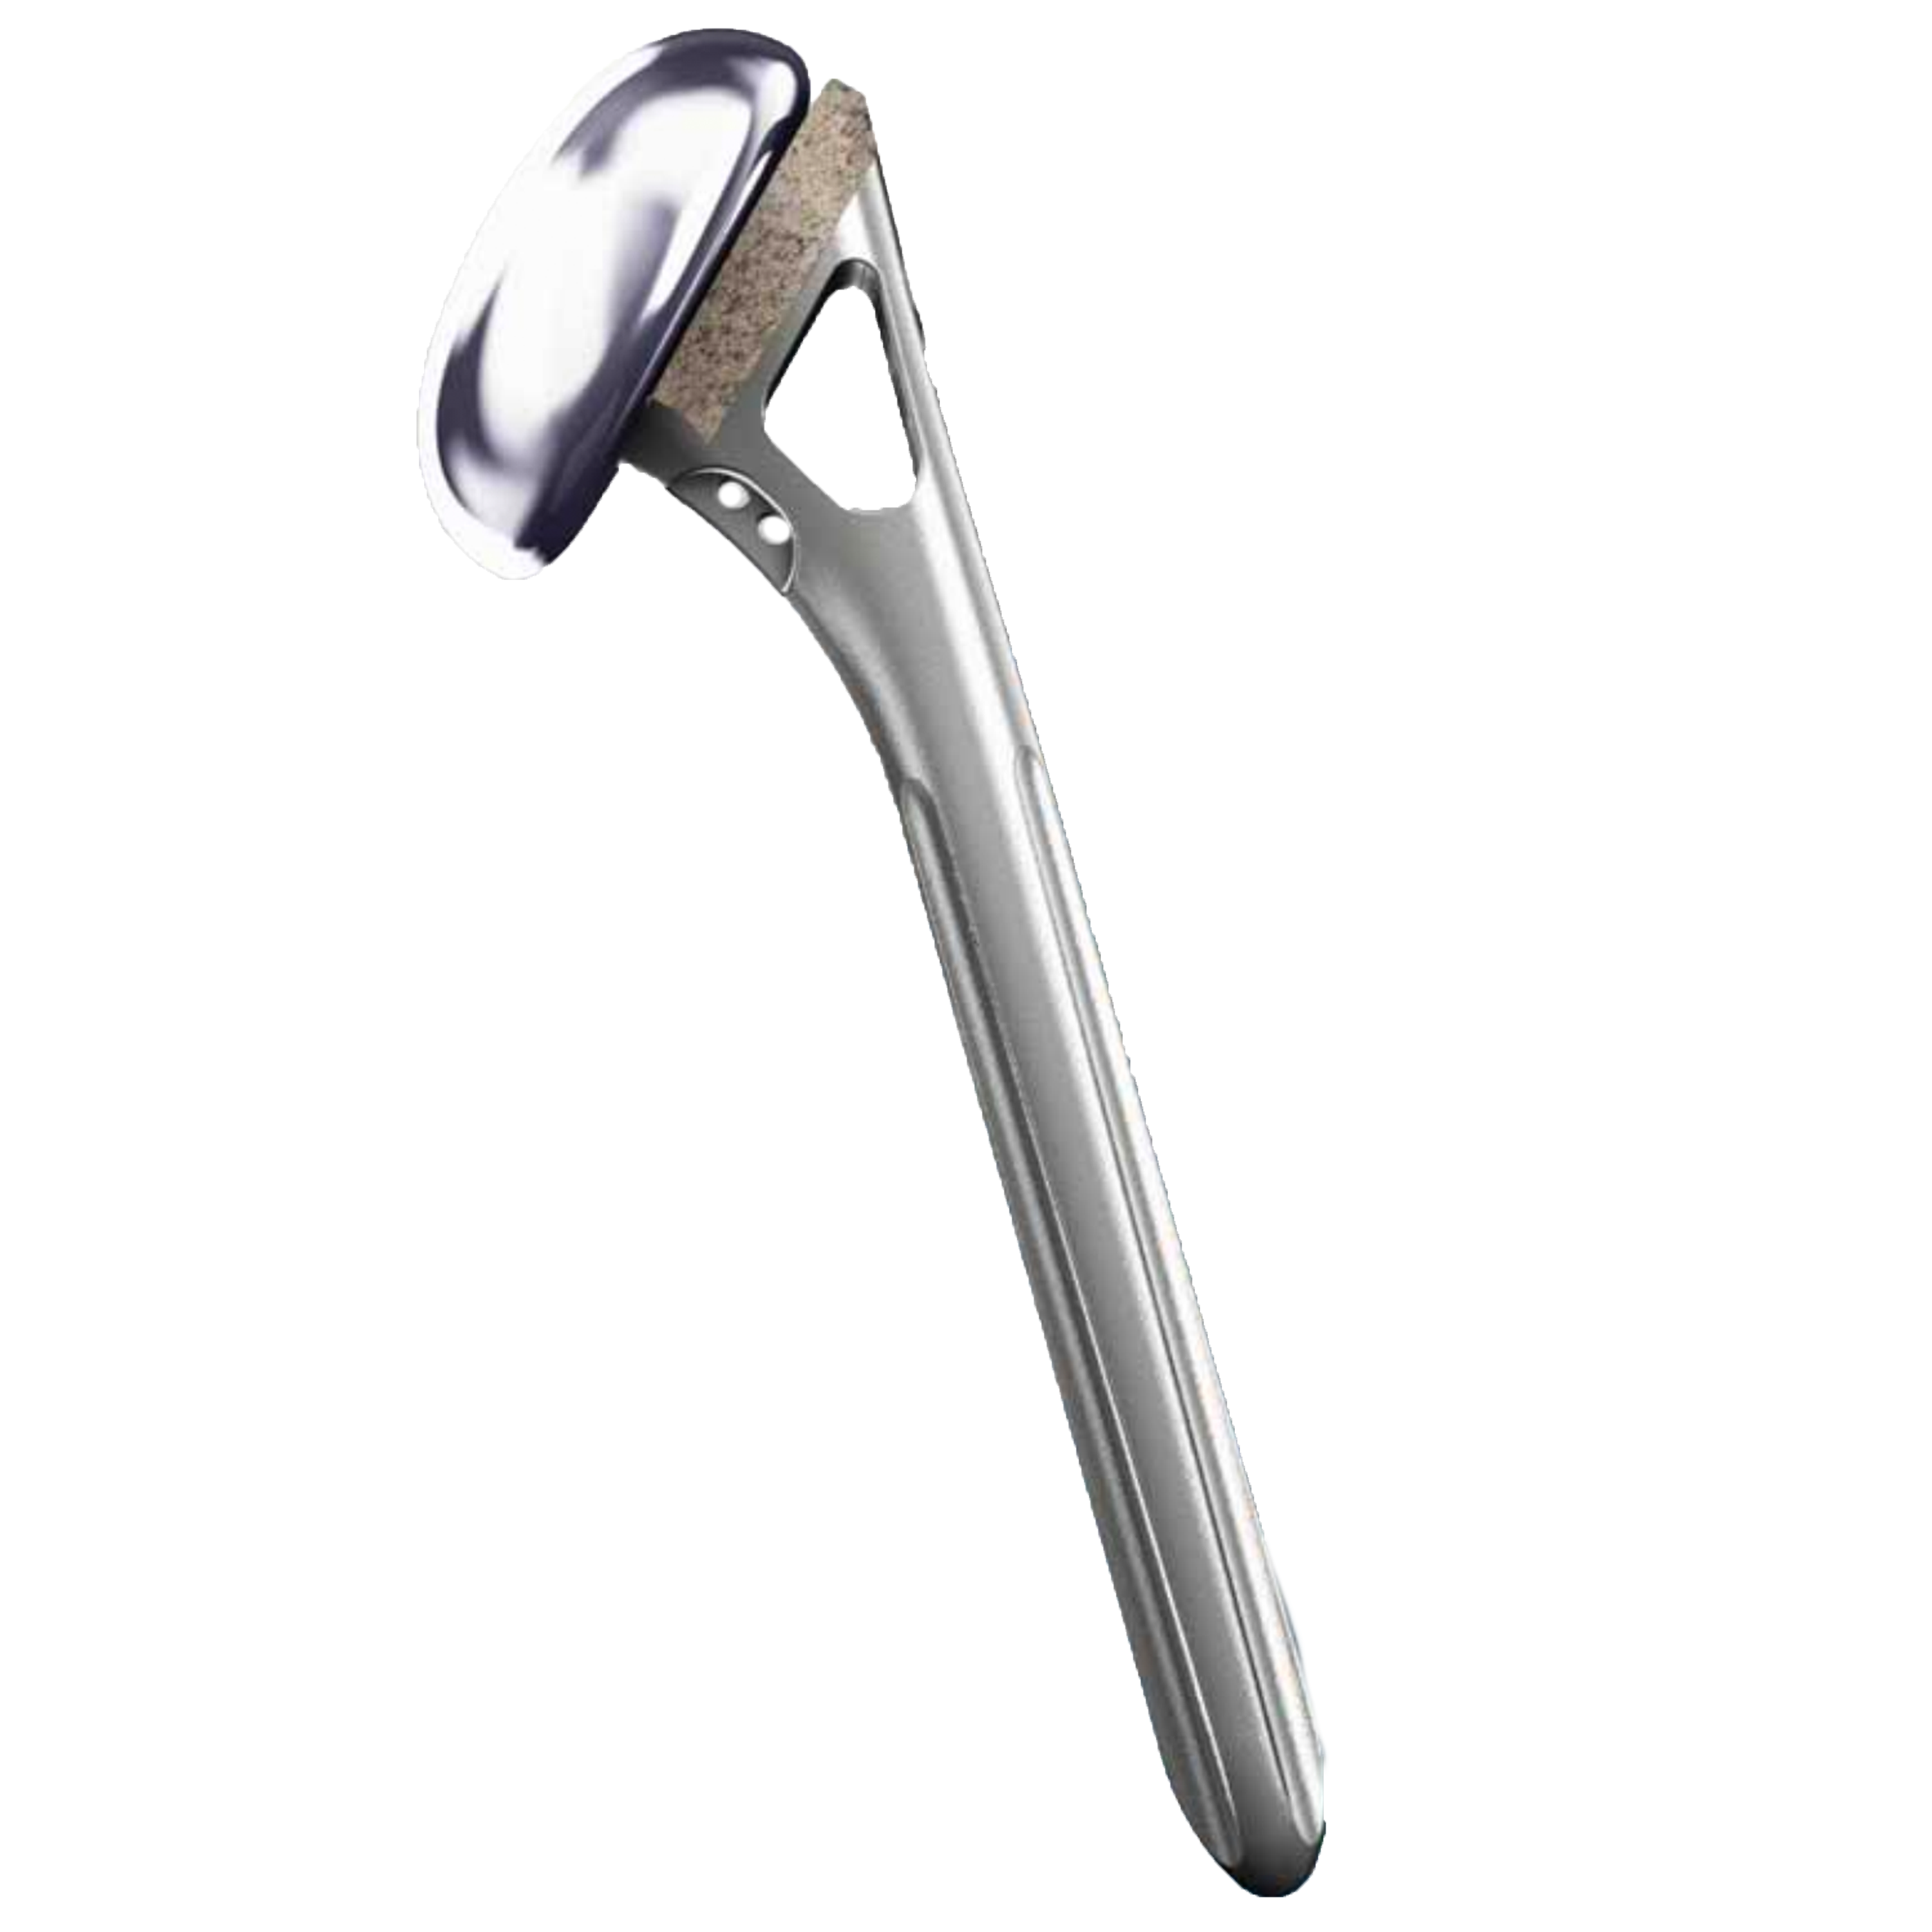 ReUnion HA Fracture System | The ReUnion HA Fracture System consists of a fracture stem design that combines the heritage of Solar products with innovative solutions for shoulder fracture procedures.